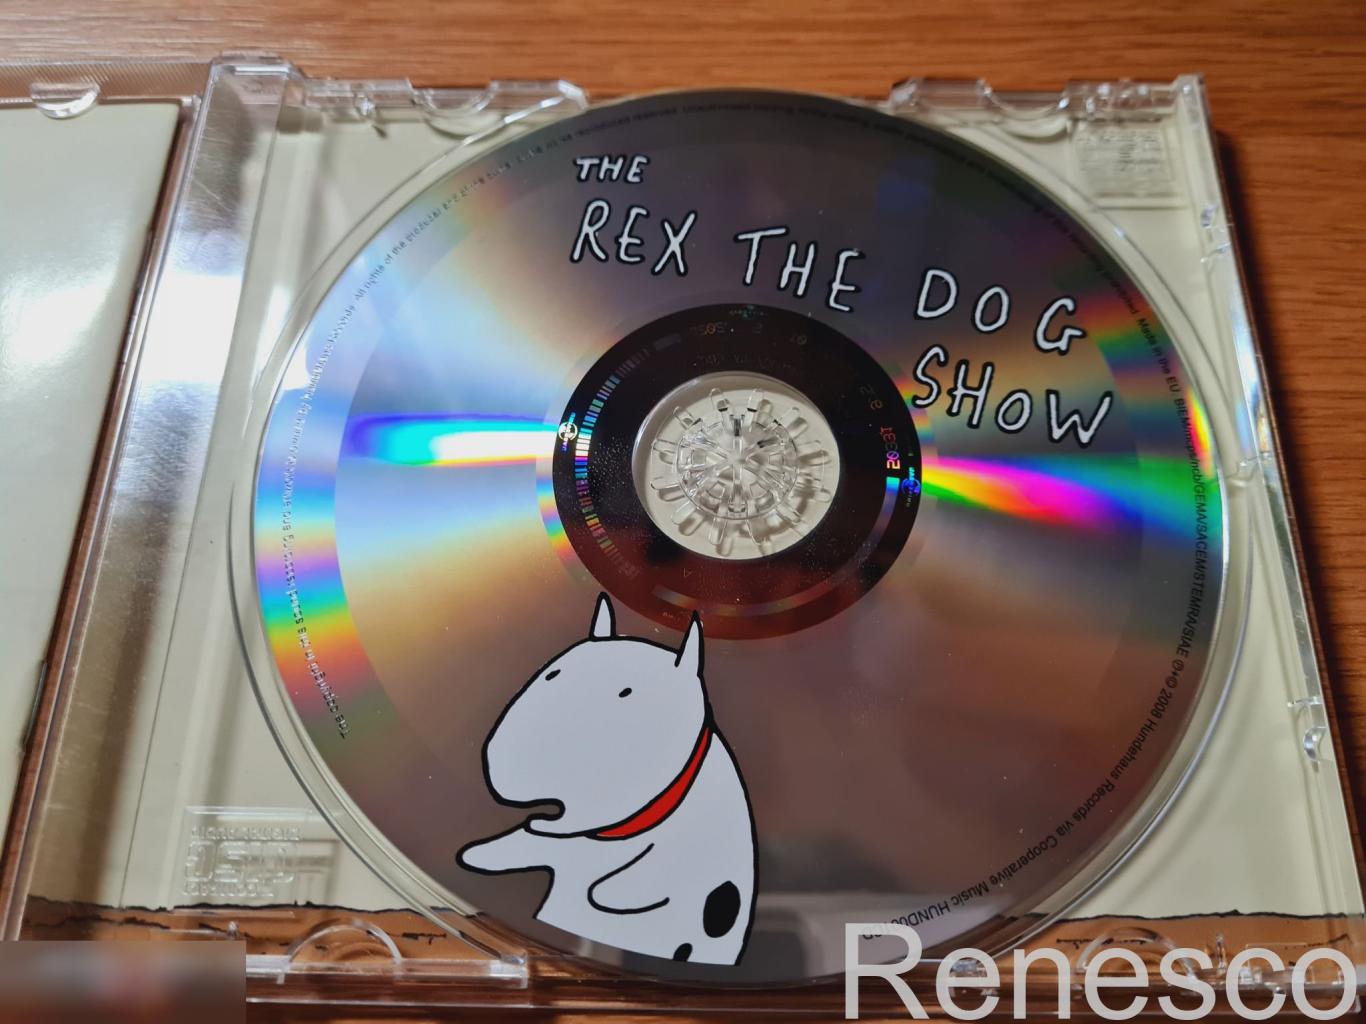 Rex The Dog ?– The Rex The Dog Show (Germany) (2008) 4